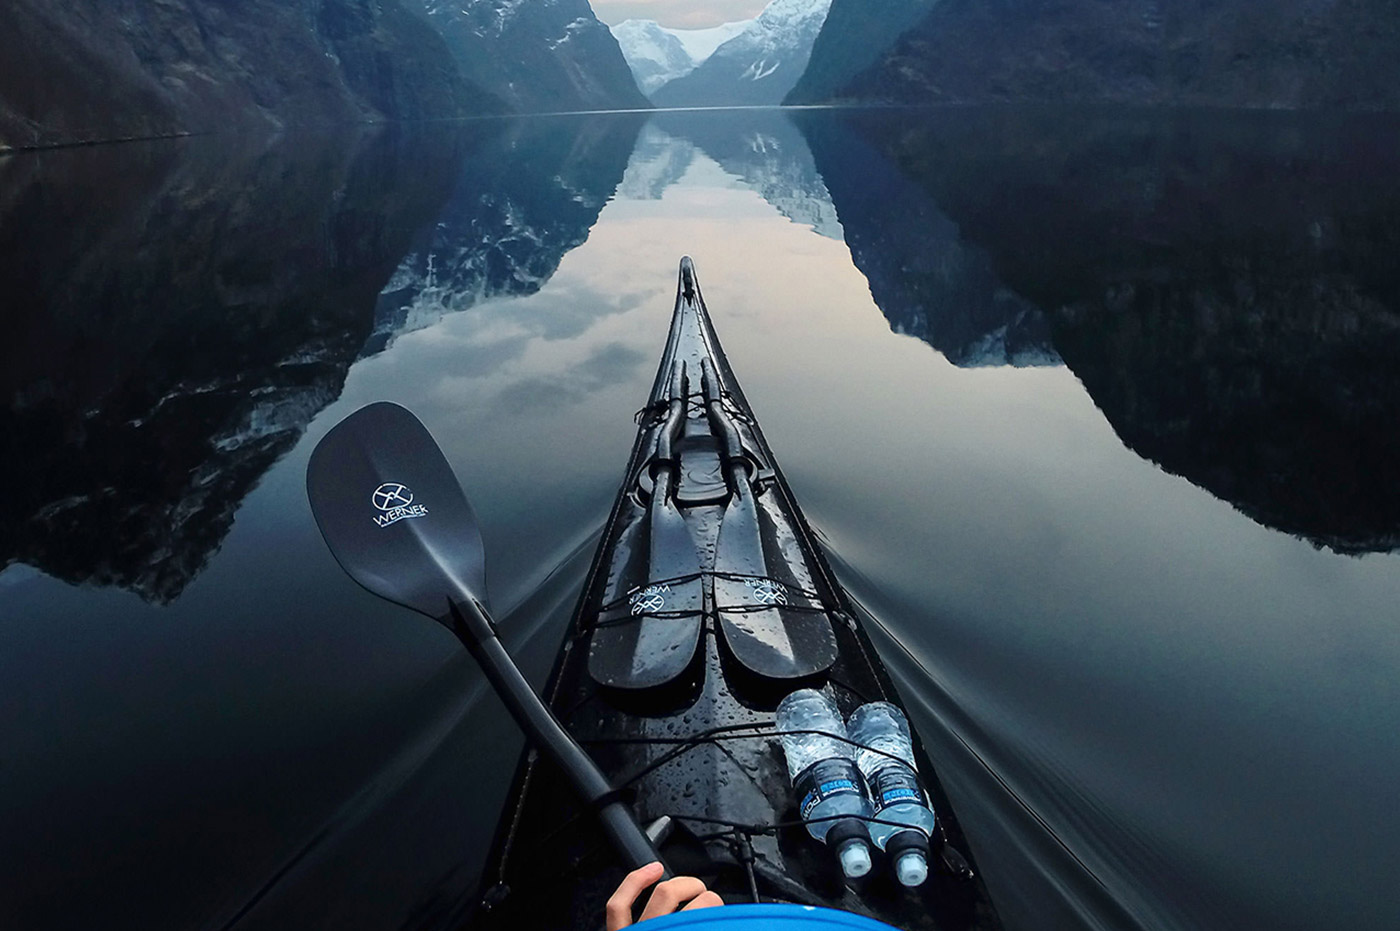 The front of a kayak and paddle in a lake by the mountains.